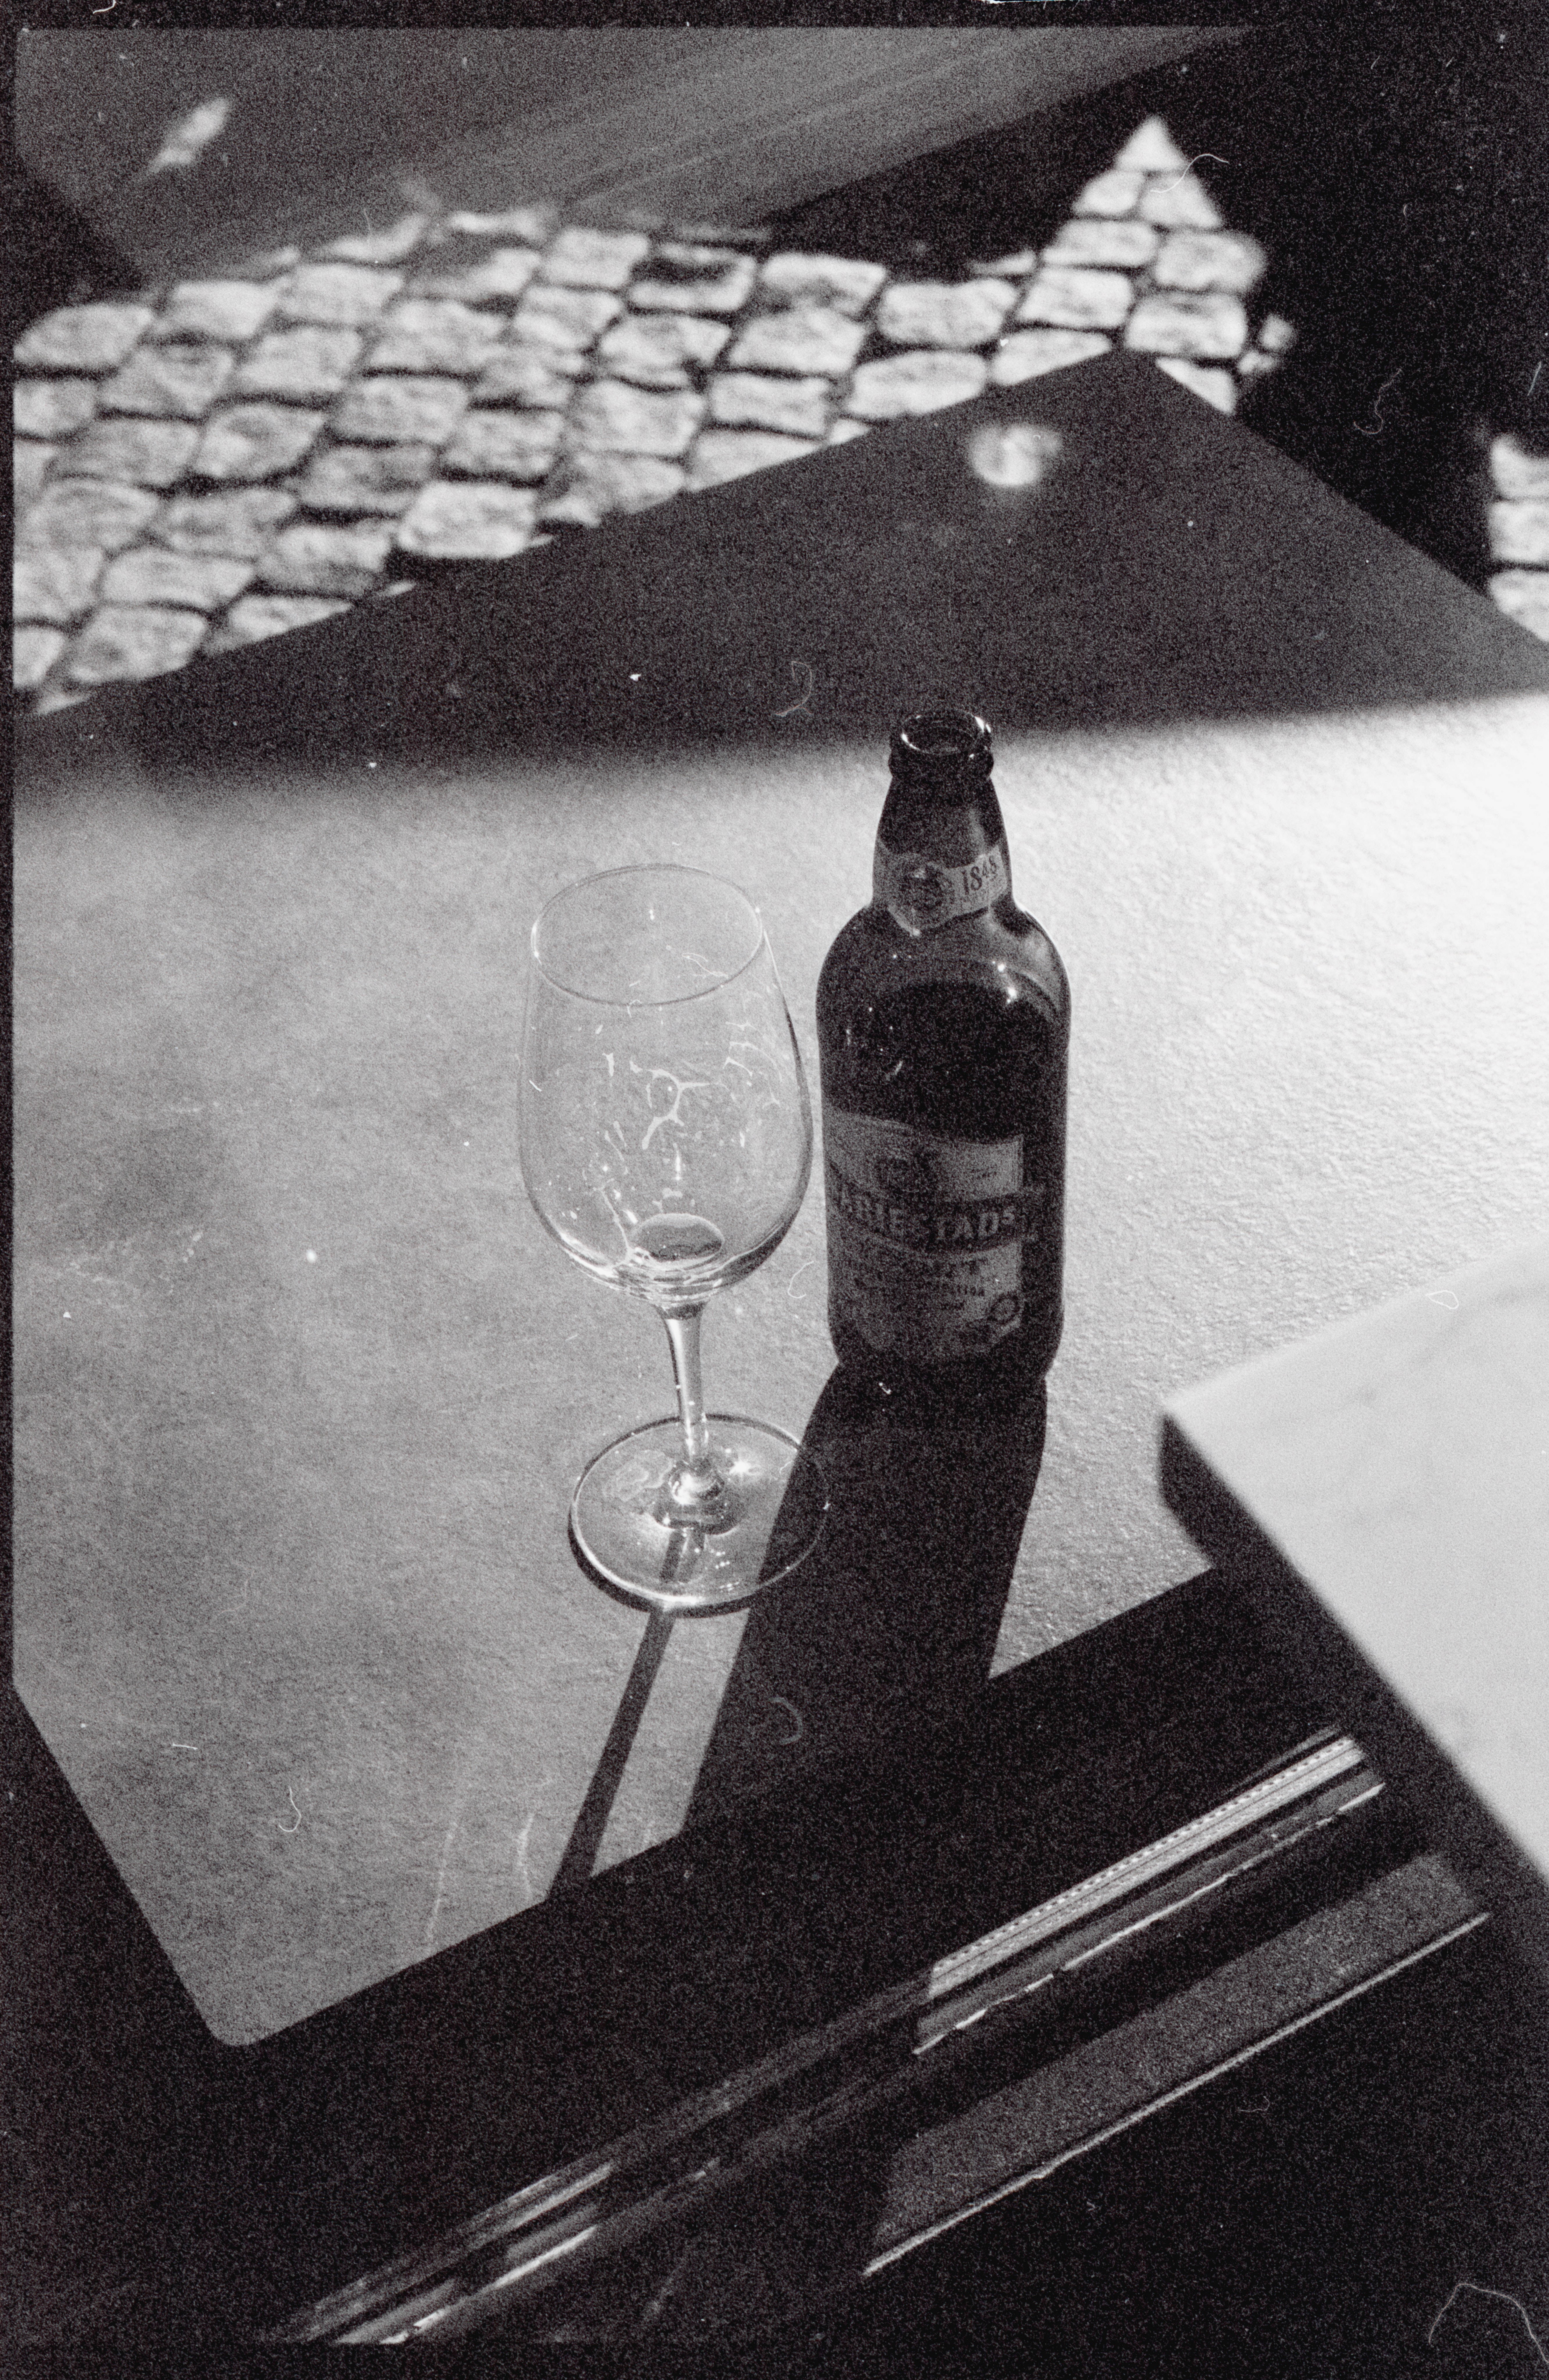 Black and white photograph of an empty wine glass and a closed bottle of beer on a reflective surface, with shadows and light creating patterns in the background, relevant to a blog post about the repercussions of DUI charges on a driver's license in Arizona.